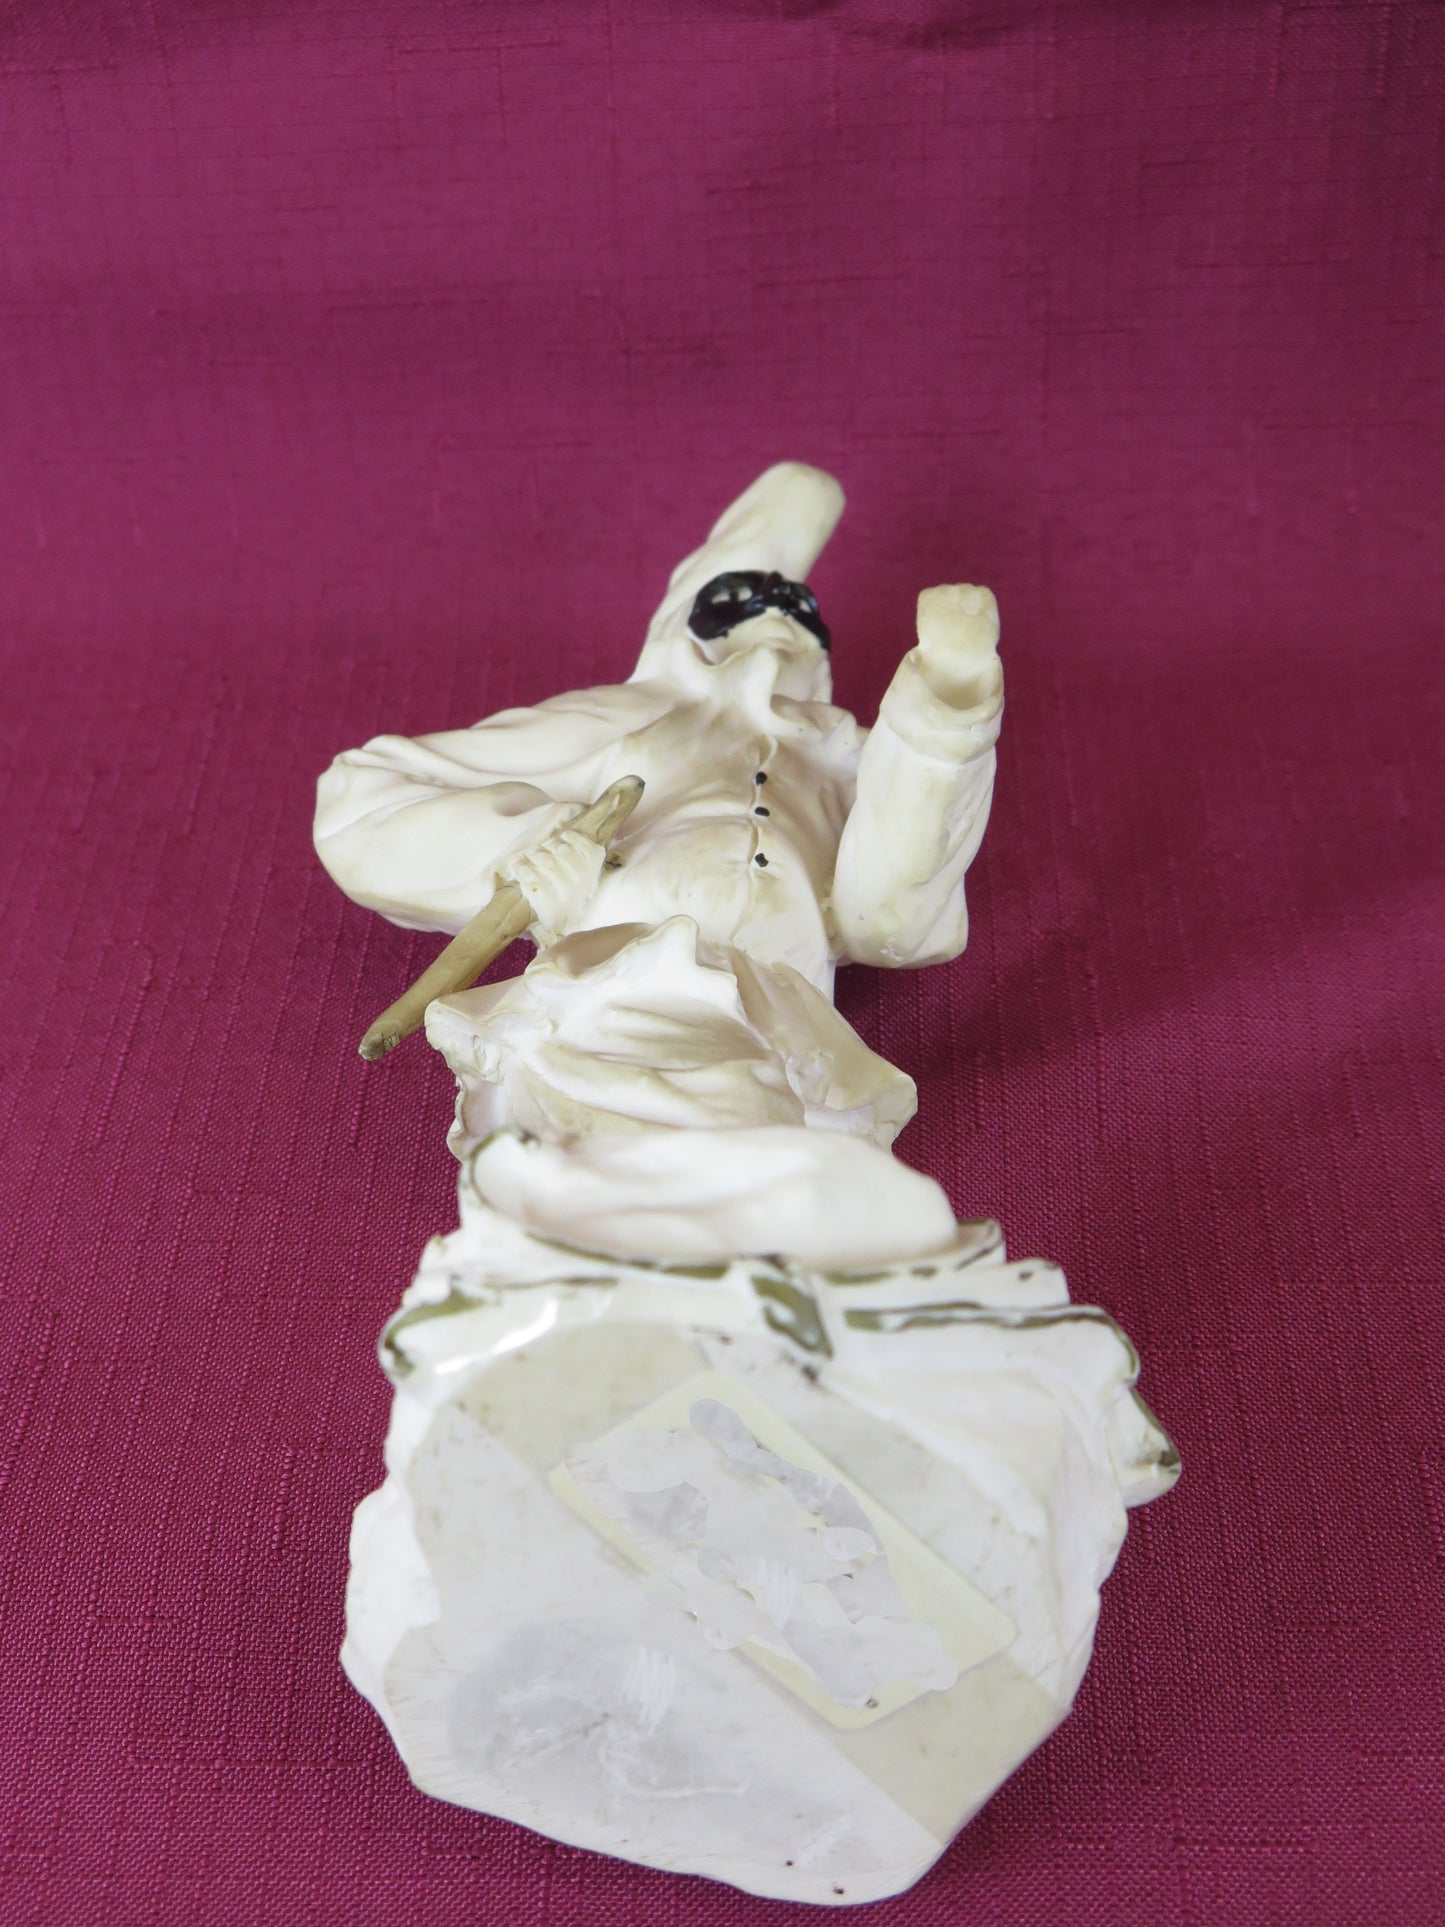 Pulcinella figurine in biscuit porcelain from the early 1900s Naples, Italy, mask vs14